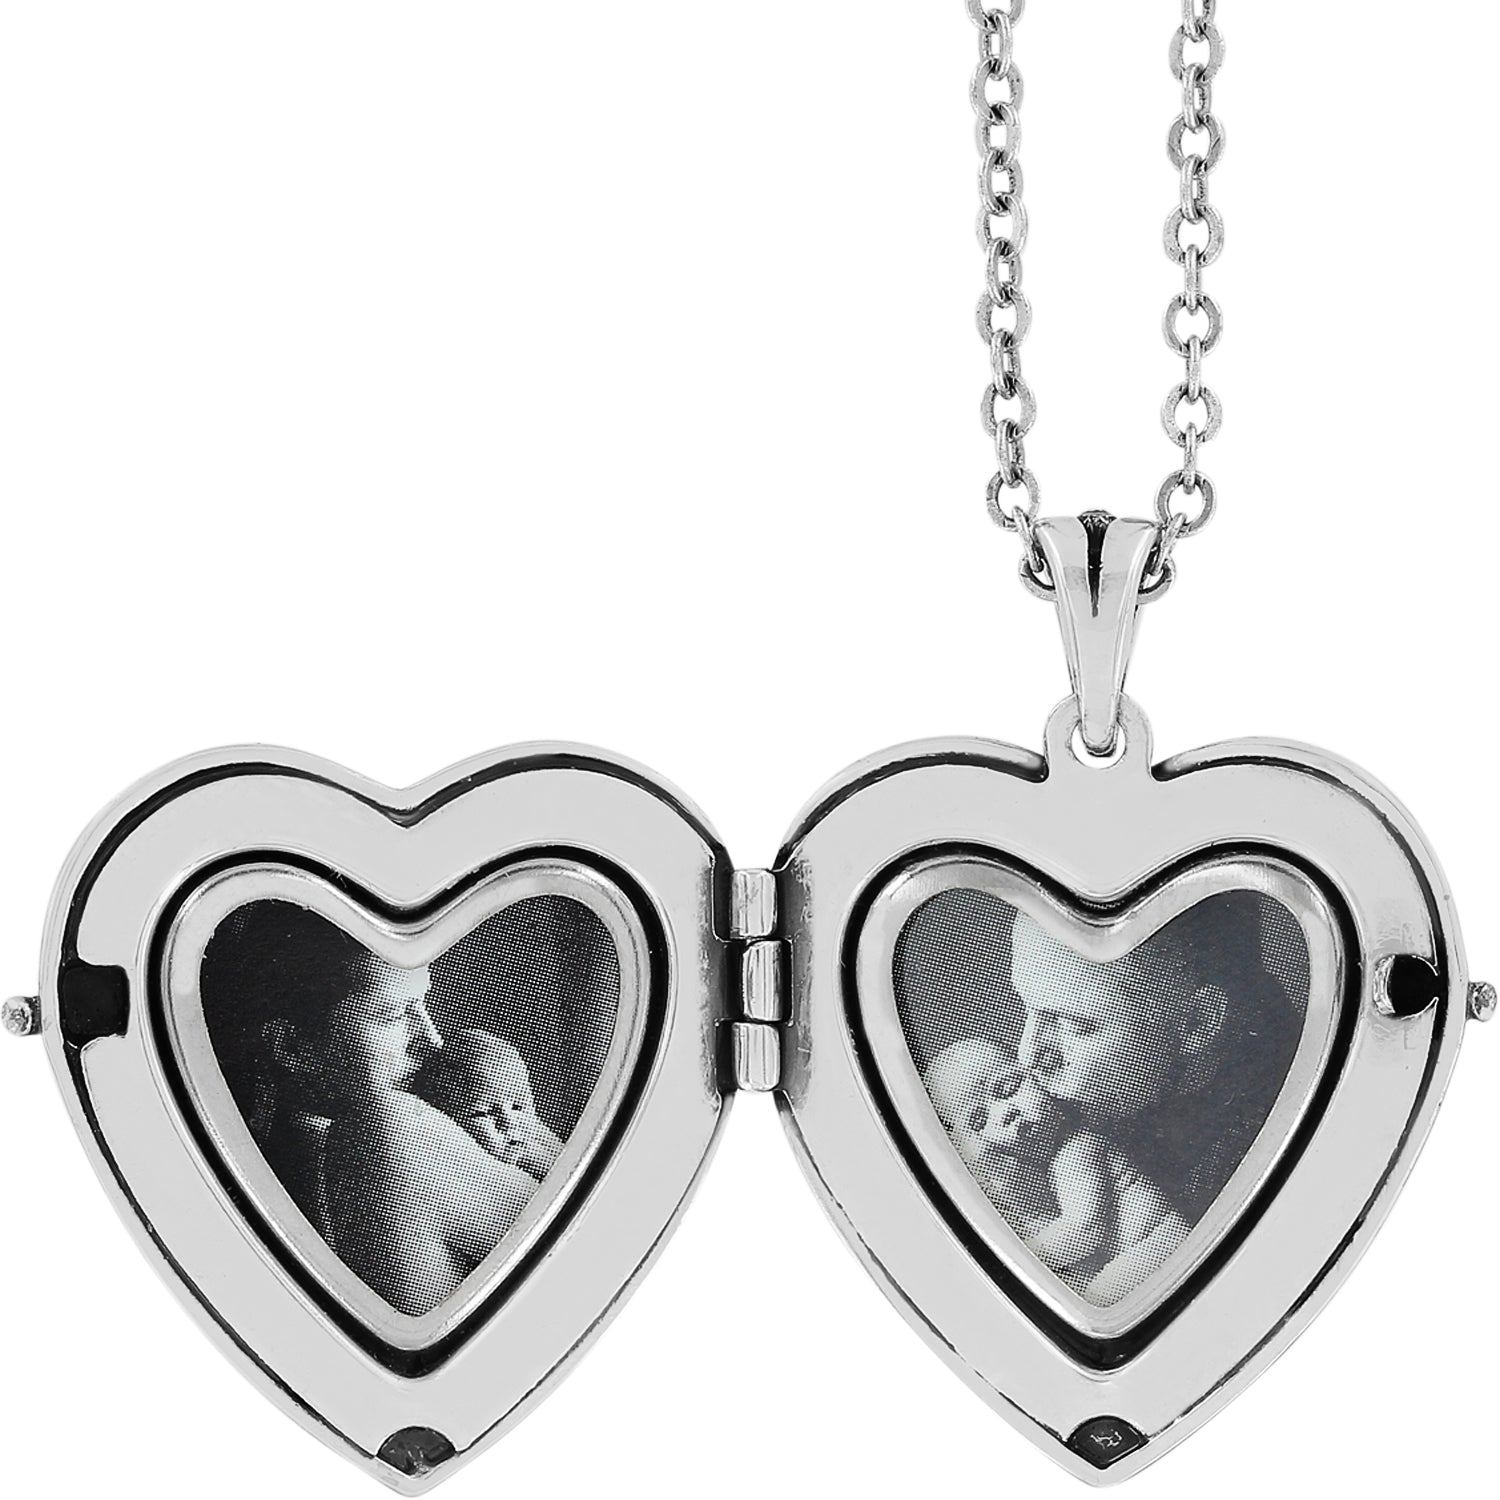 Adhvik CMB8018 Heart Shape Love Couple Mini Photo Frame Memory Locket  Pendant Necklace Silver, Gold-plated Stainless Steel Pendant Set Price in  India - Buy Adhvik CMB8018 Heart Shape Love Couple Mini Photo